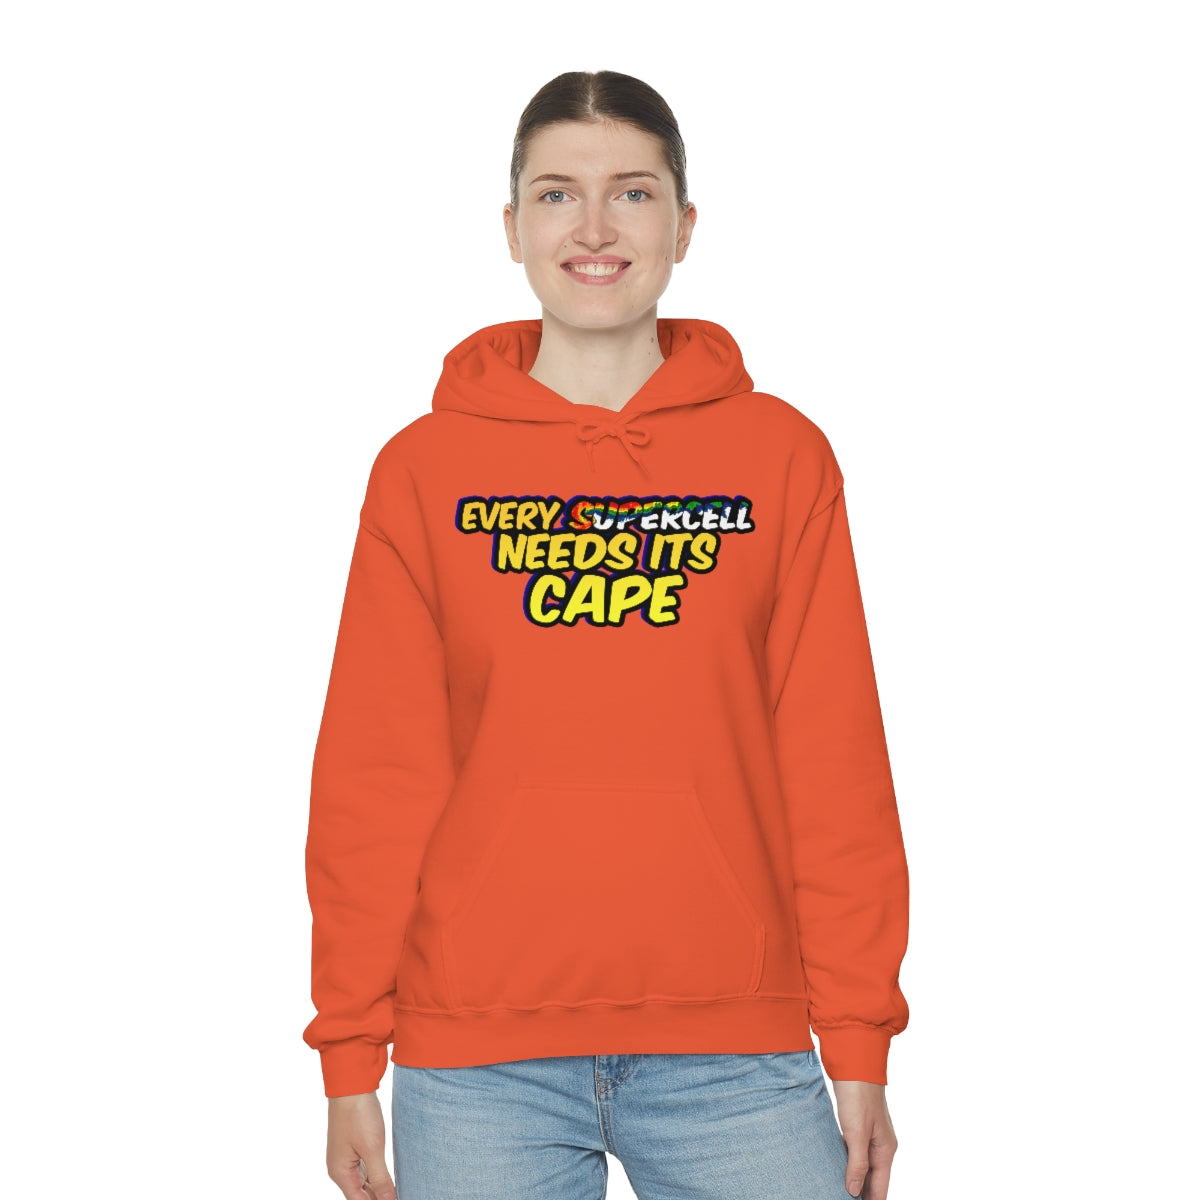 Every Supercell Needs Its CAPE Hoodie 